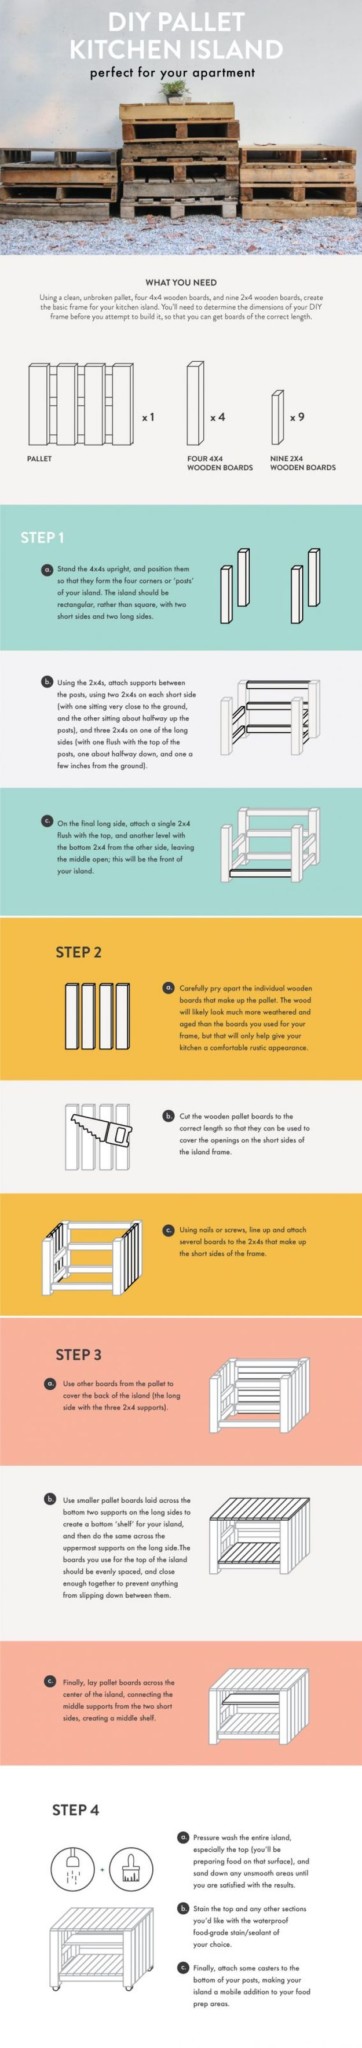 DIY Pallet Kitchen Island infographic | 3 Simple and Inexpensive DIY Furniture Projects